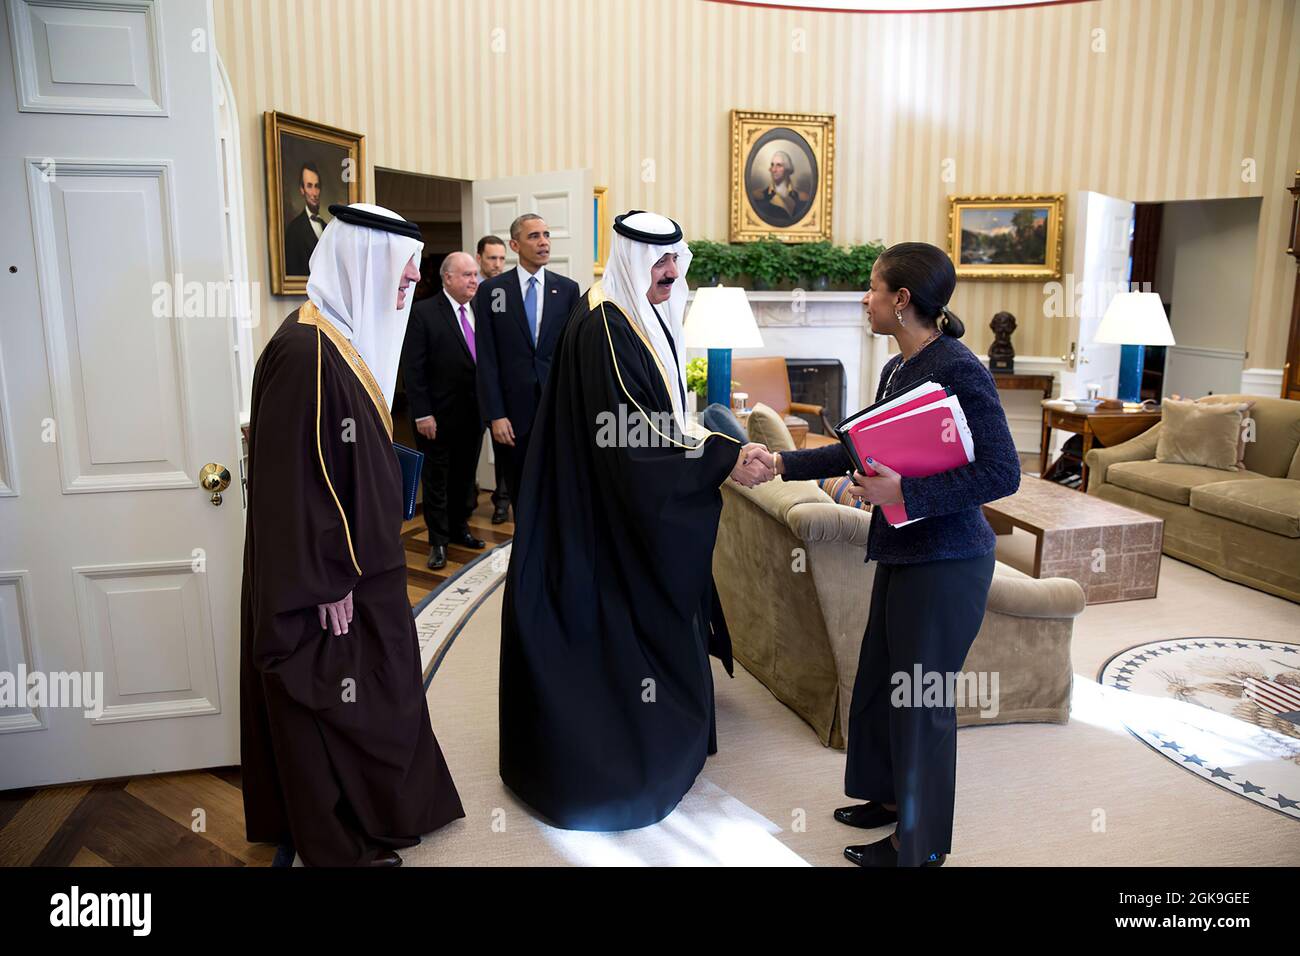 National Security Advisor Susan E. Rice greets Prince Mitib bin Abdallah bin Abd al-Aziz Al Saud, Saudi Arabia's Minister of the National Guard, prior to a meeting with President Barack Obama in the Oval Office, Nov. 19, 2014. At left is Amb. Adel Al-Jubeir, Saudi Ambassador to the U.S. (Official White House Photo by Pete Souza) This official White House photograph is being made available only for publication by news organizations and/or for personal use printing by the subject(s) of the photograph. The photograph may not be manipulated in any way and may not be used in commercial or political Stock Photo